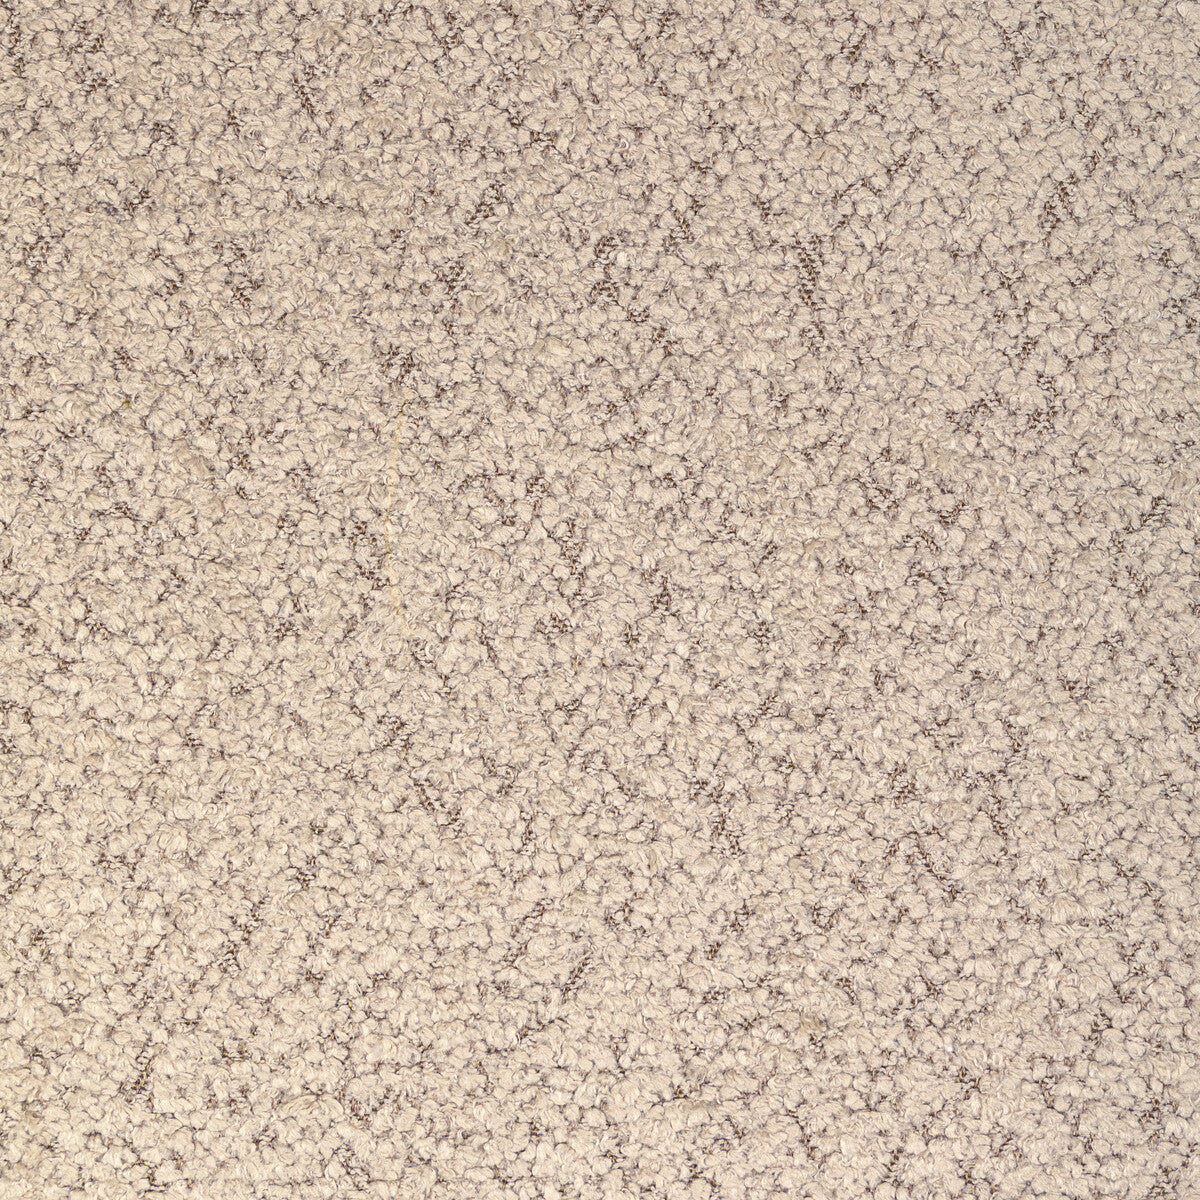 Marino fabric in linen color - pattern 36746.16.0 - by Kravet Contract in the Refined Textures Performance Crypton collection